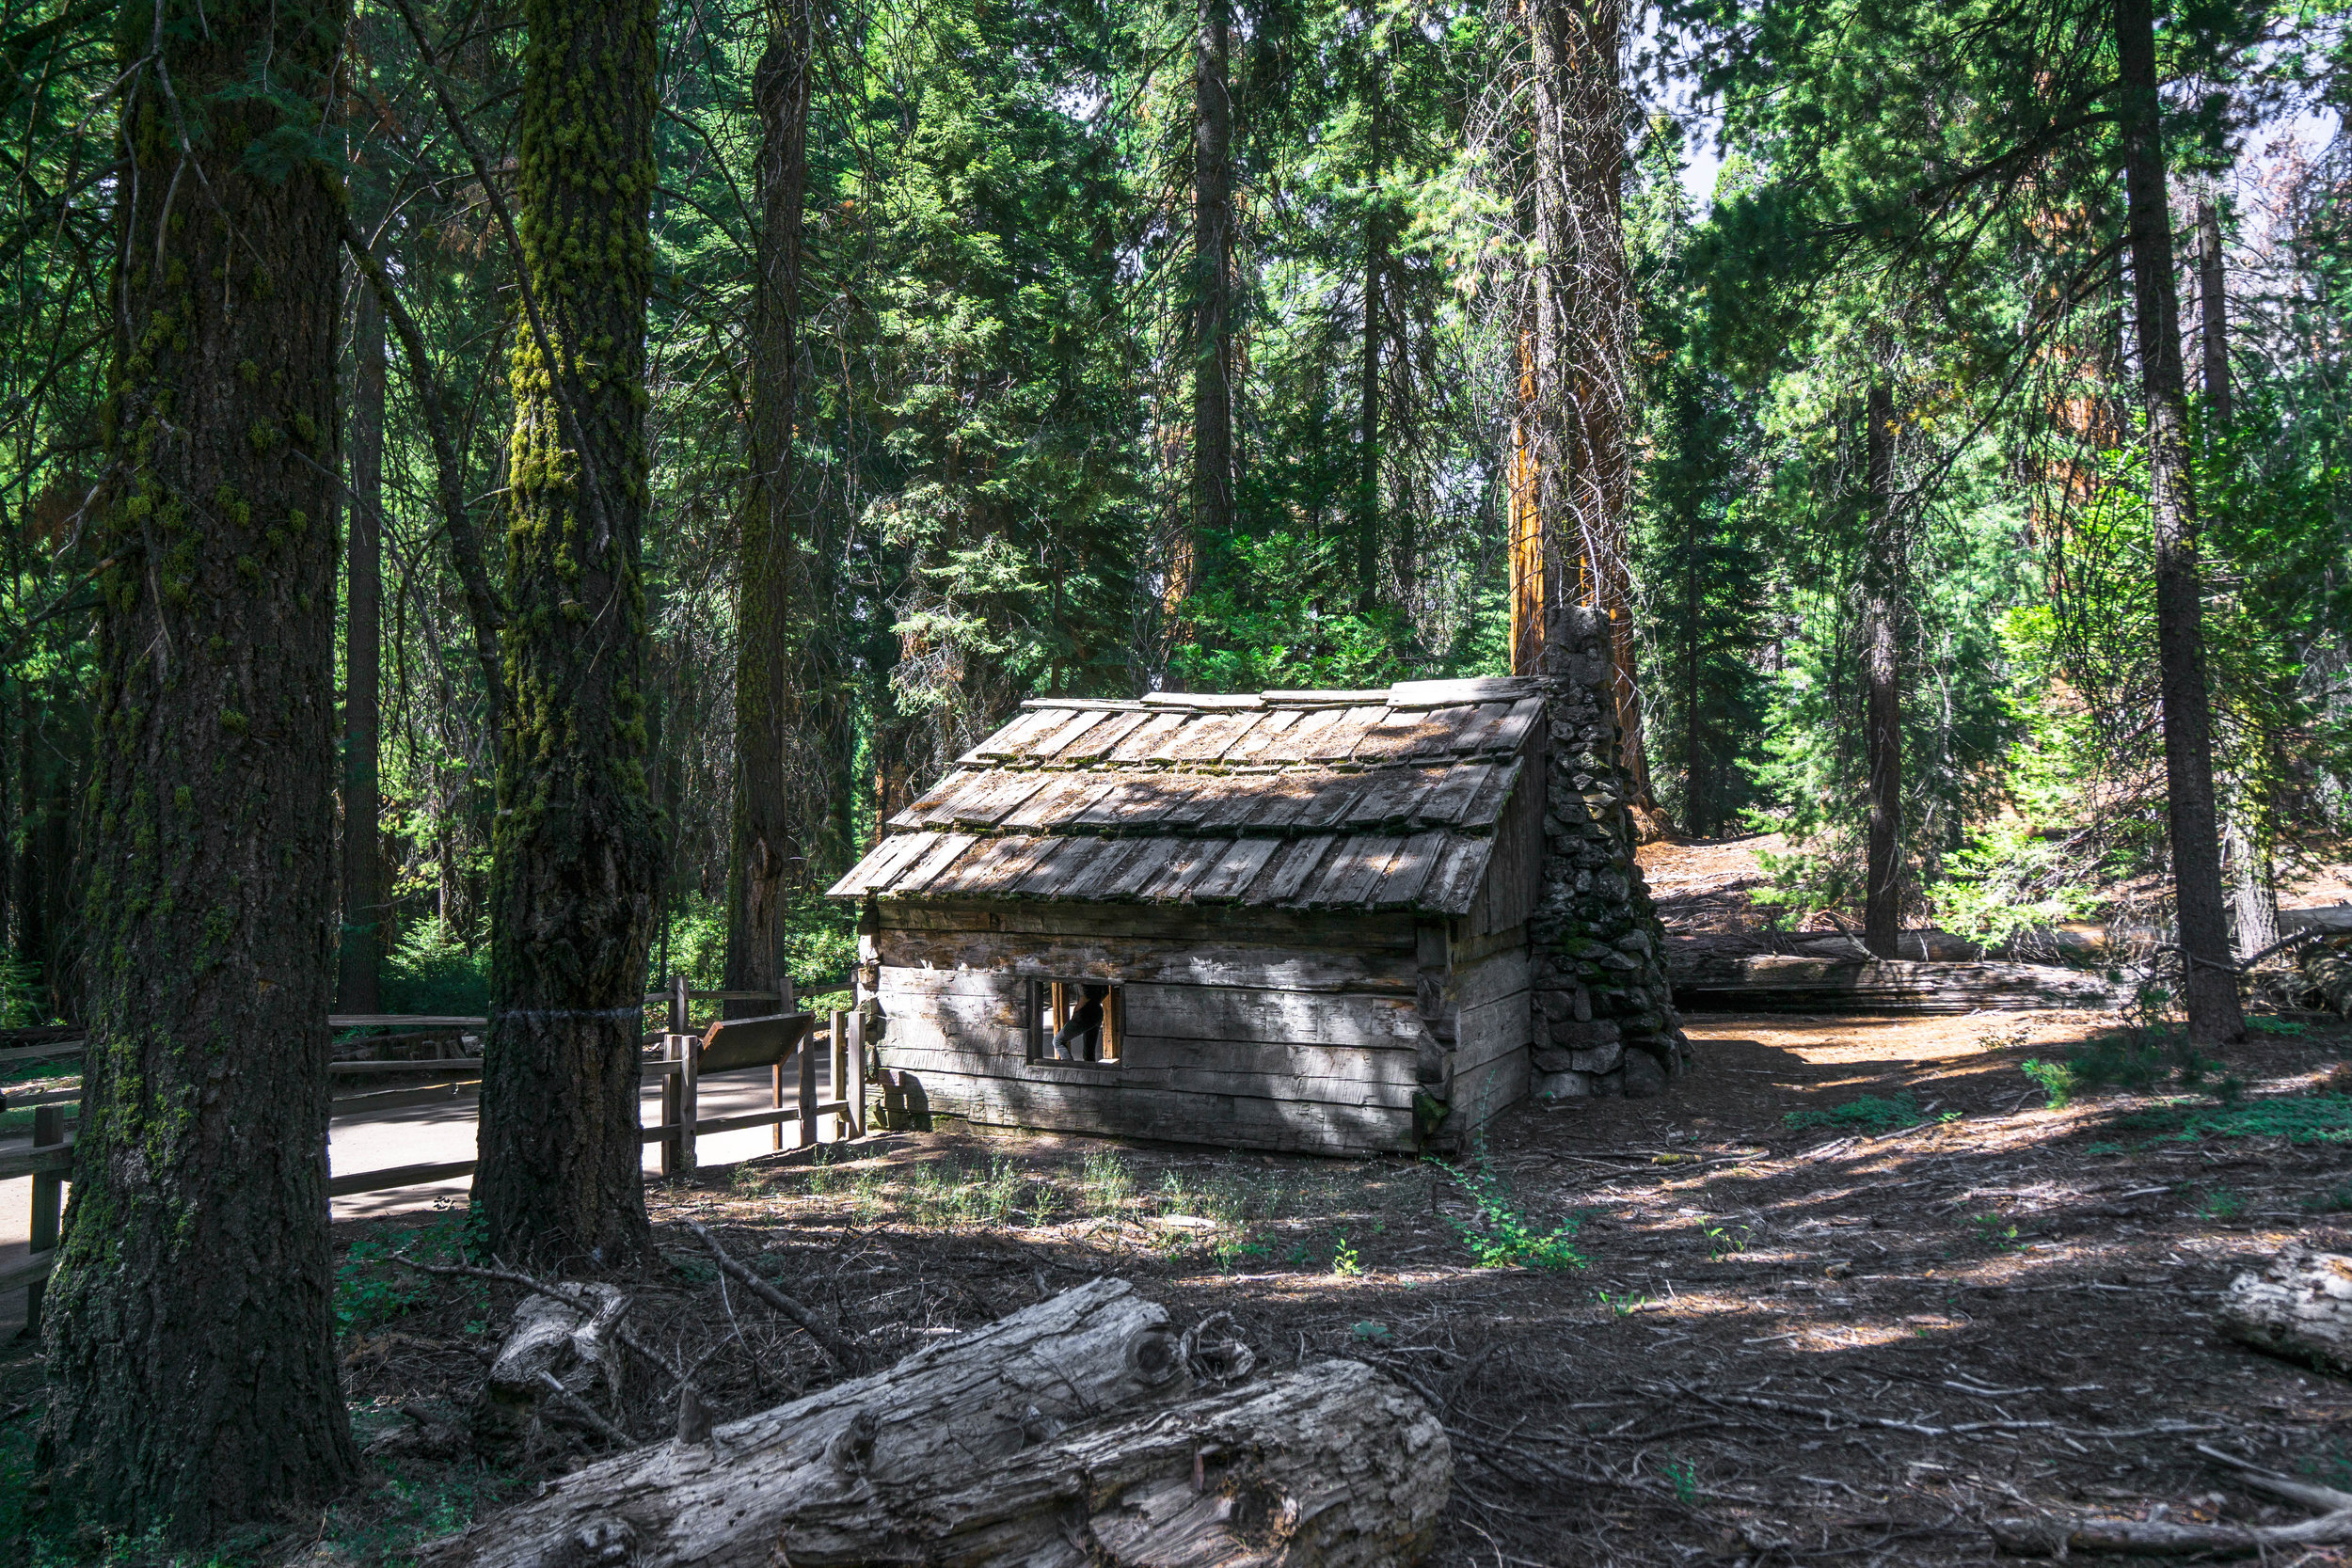 An old cabin from an 1800's rancher remains as a reminder that these mountains weren't always a National Park.